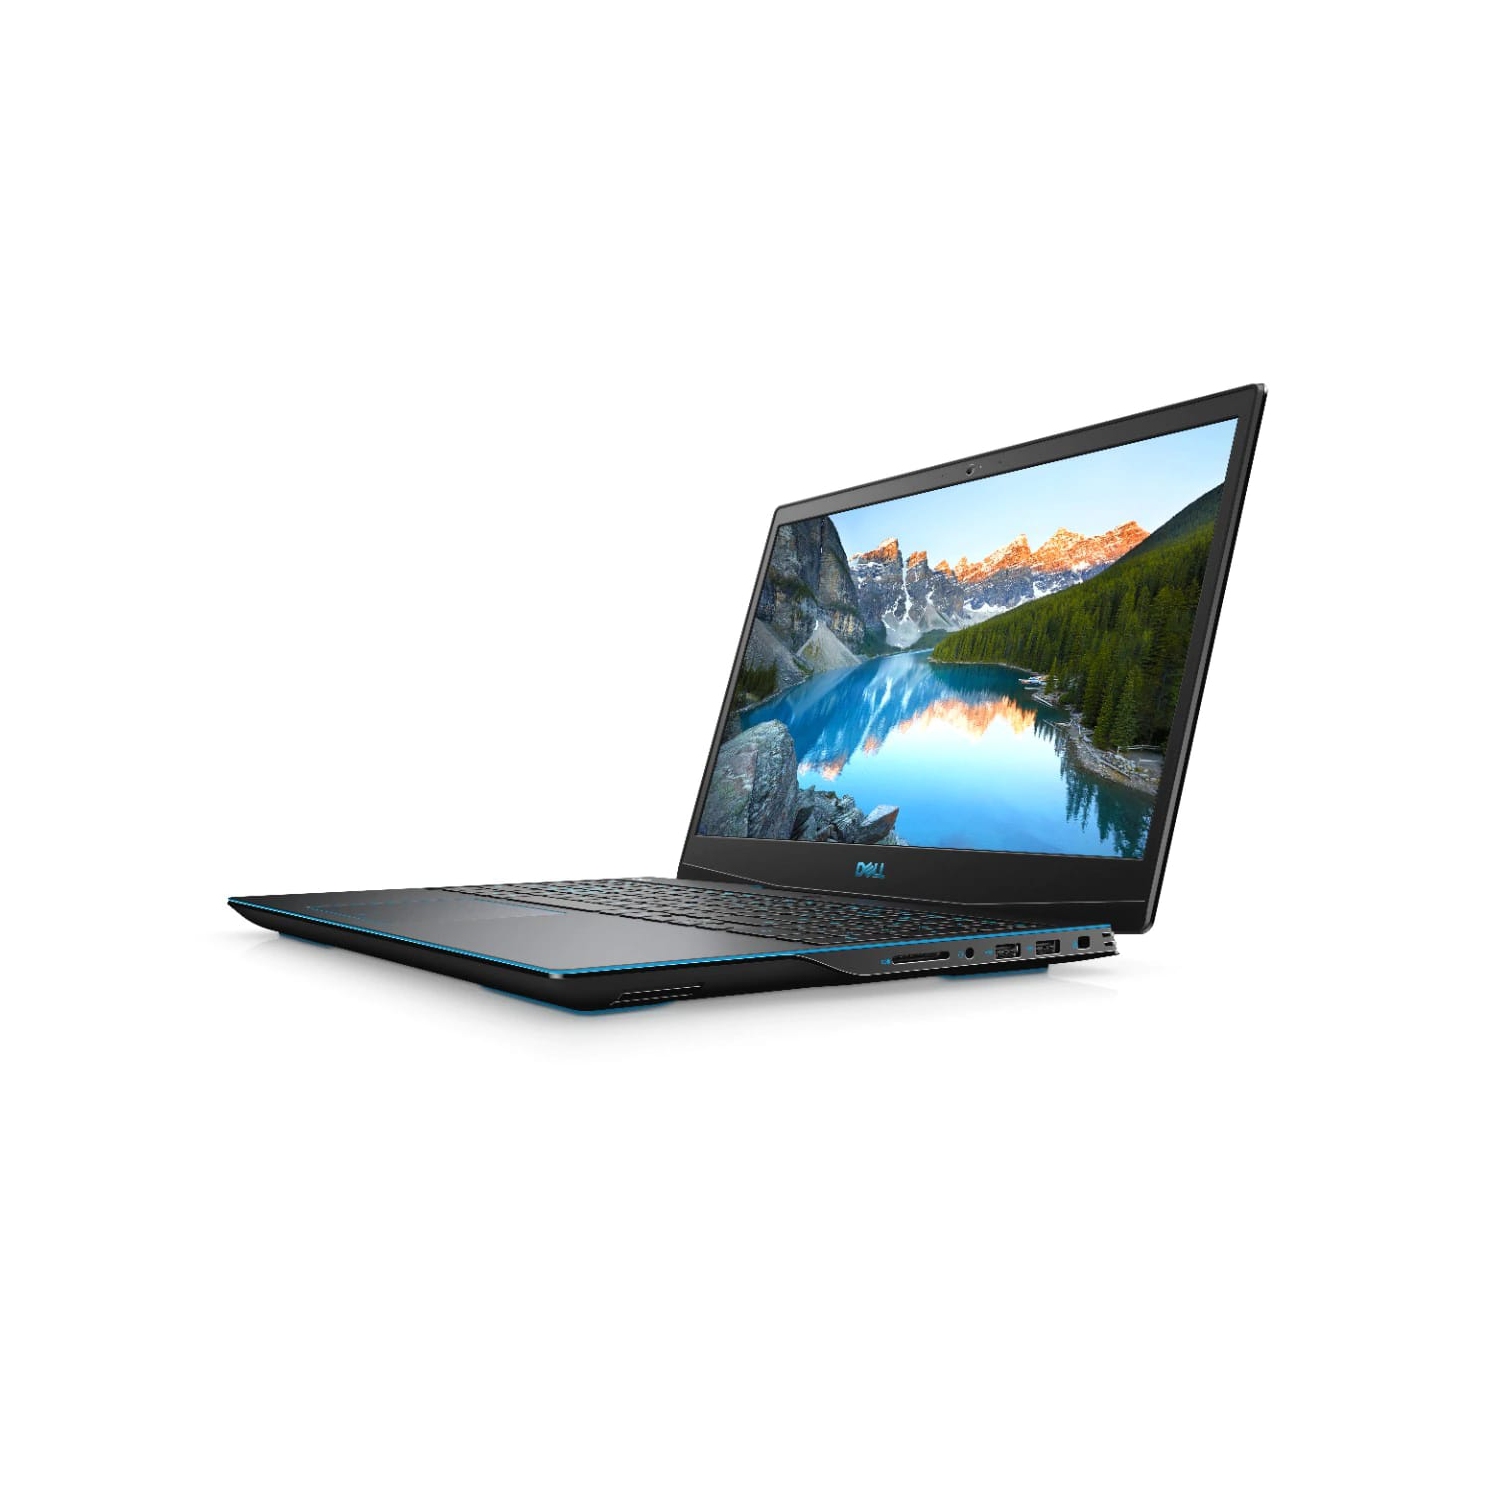 Refurbished (Excellent) – Dell G3 3500 Gaming Laptop (2020) | 15.6" FHD | Core i5 - 256GB SSD - 32GB RAM - GTX 1650 | 4 Cores @ 4.5 GHz - 10th Gen CPU